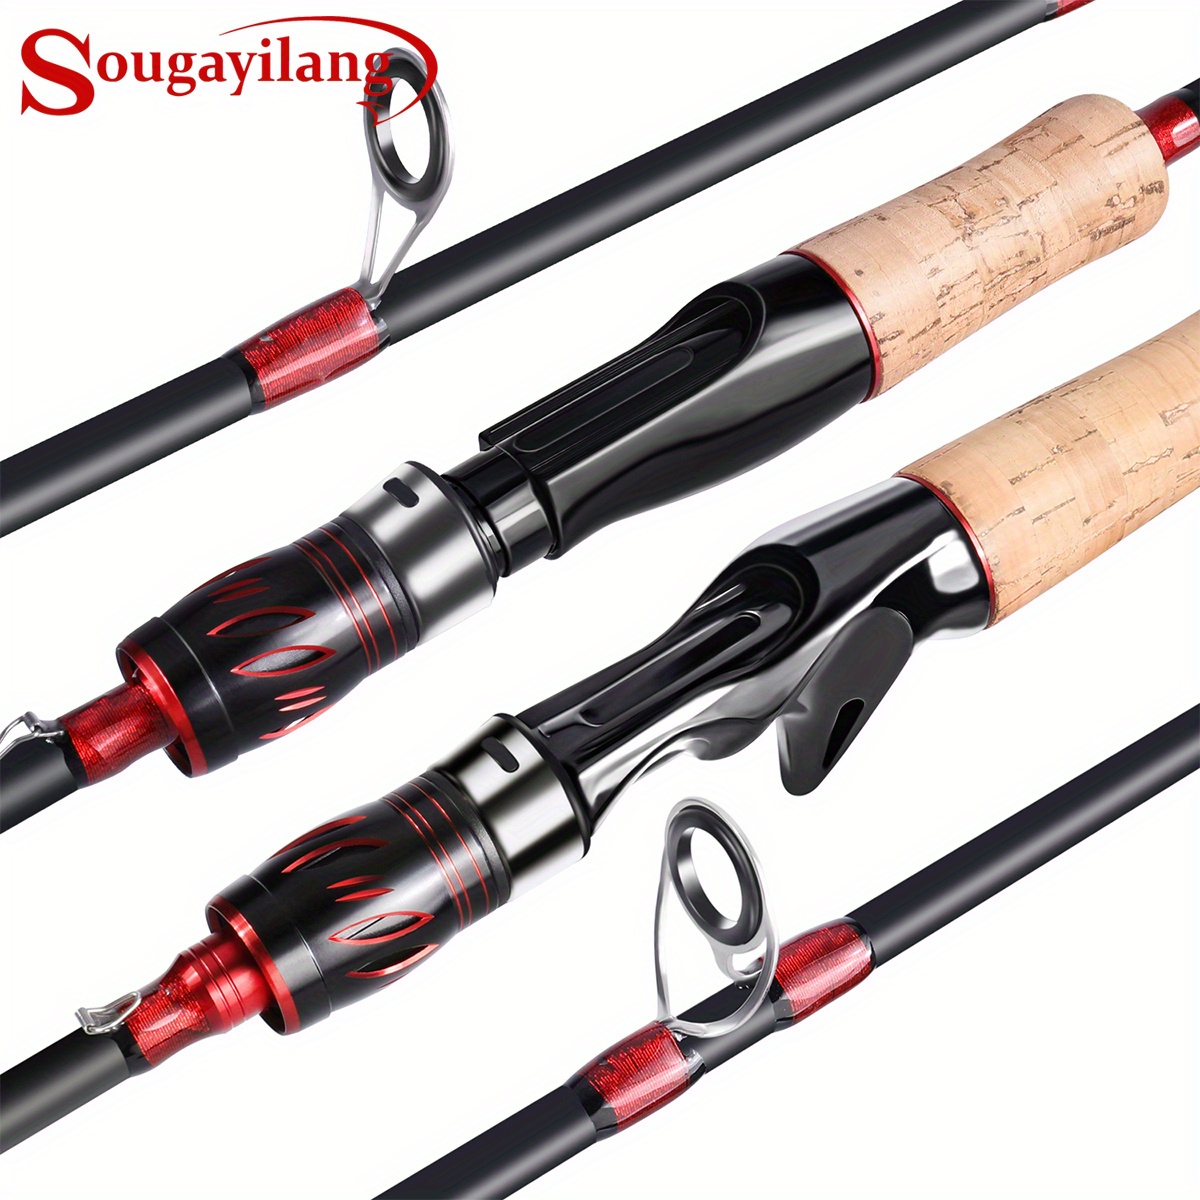 Sougayilang 1pc 2-section 165cm/5.4ft Spinning & Casting Rod With Cork  Handle For Freshwater